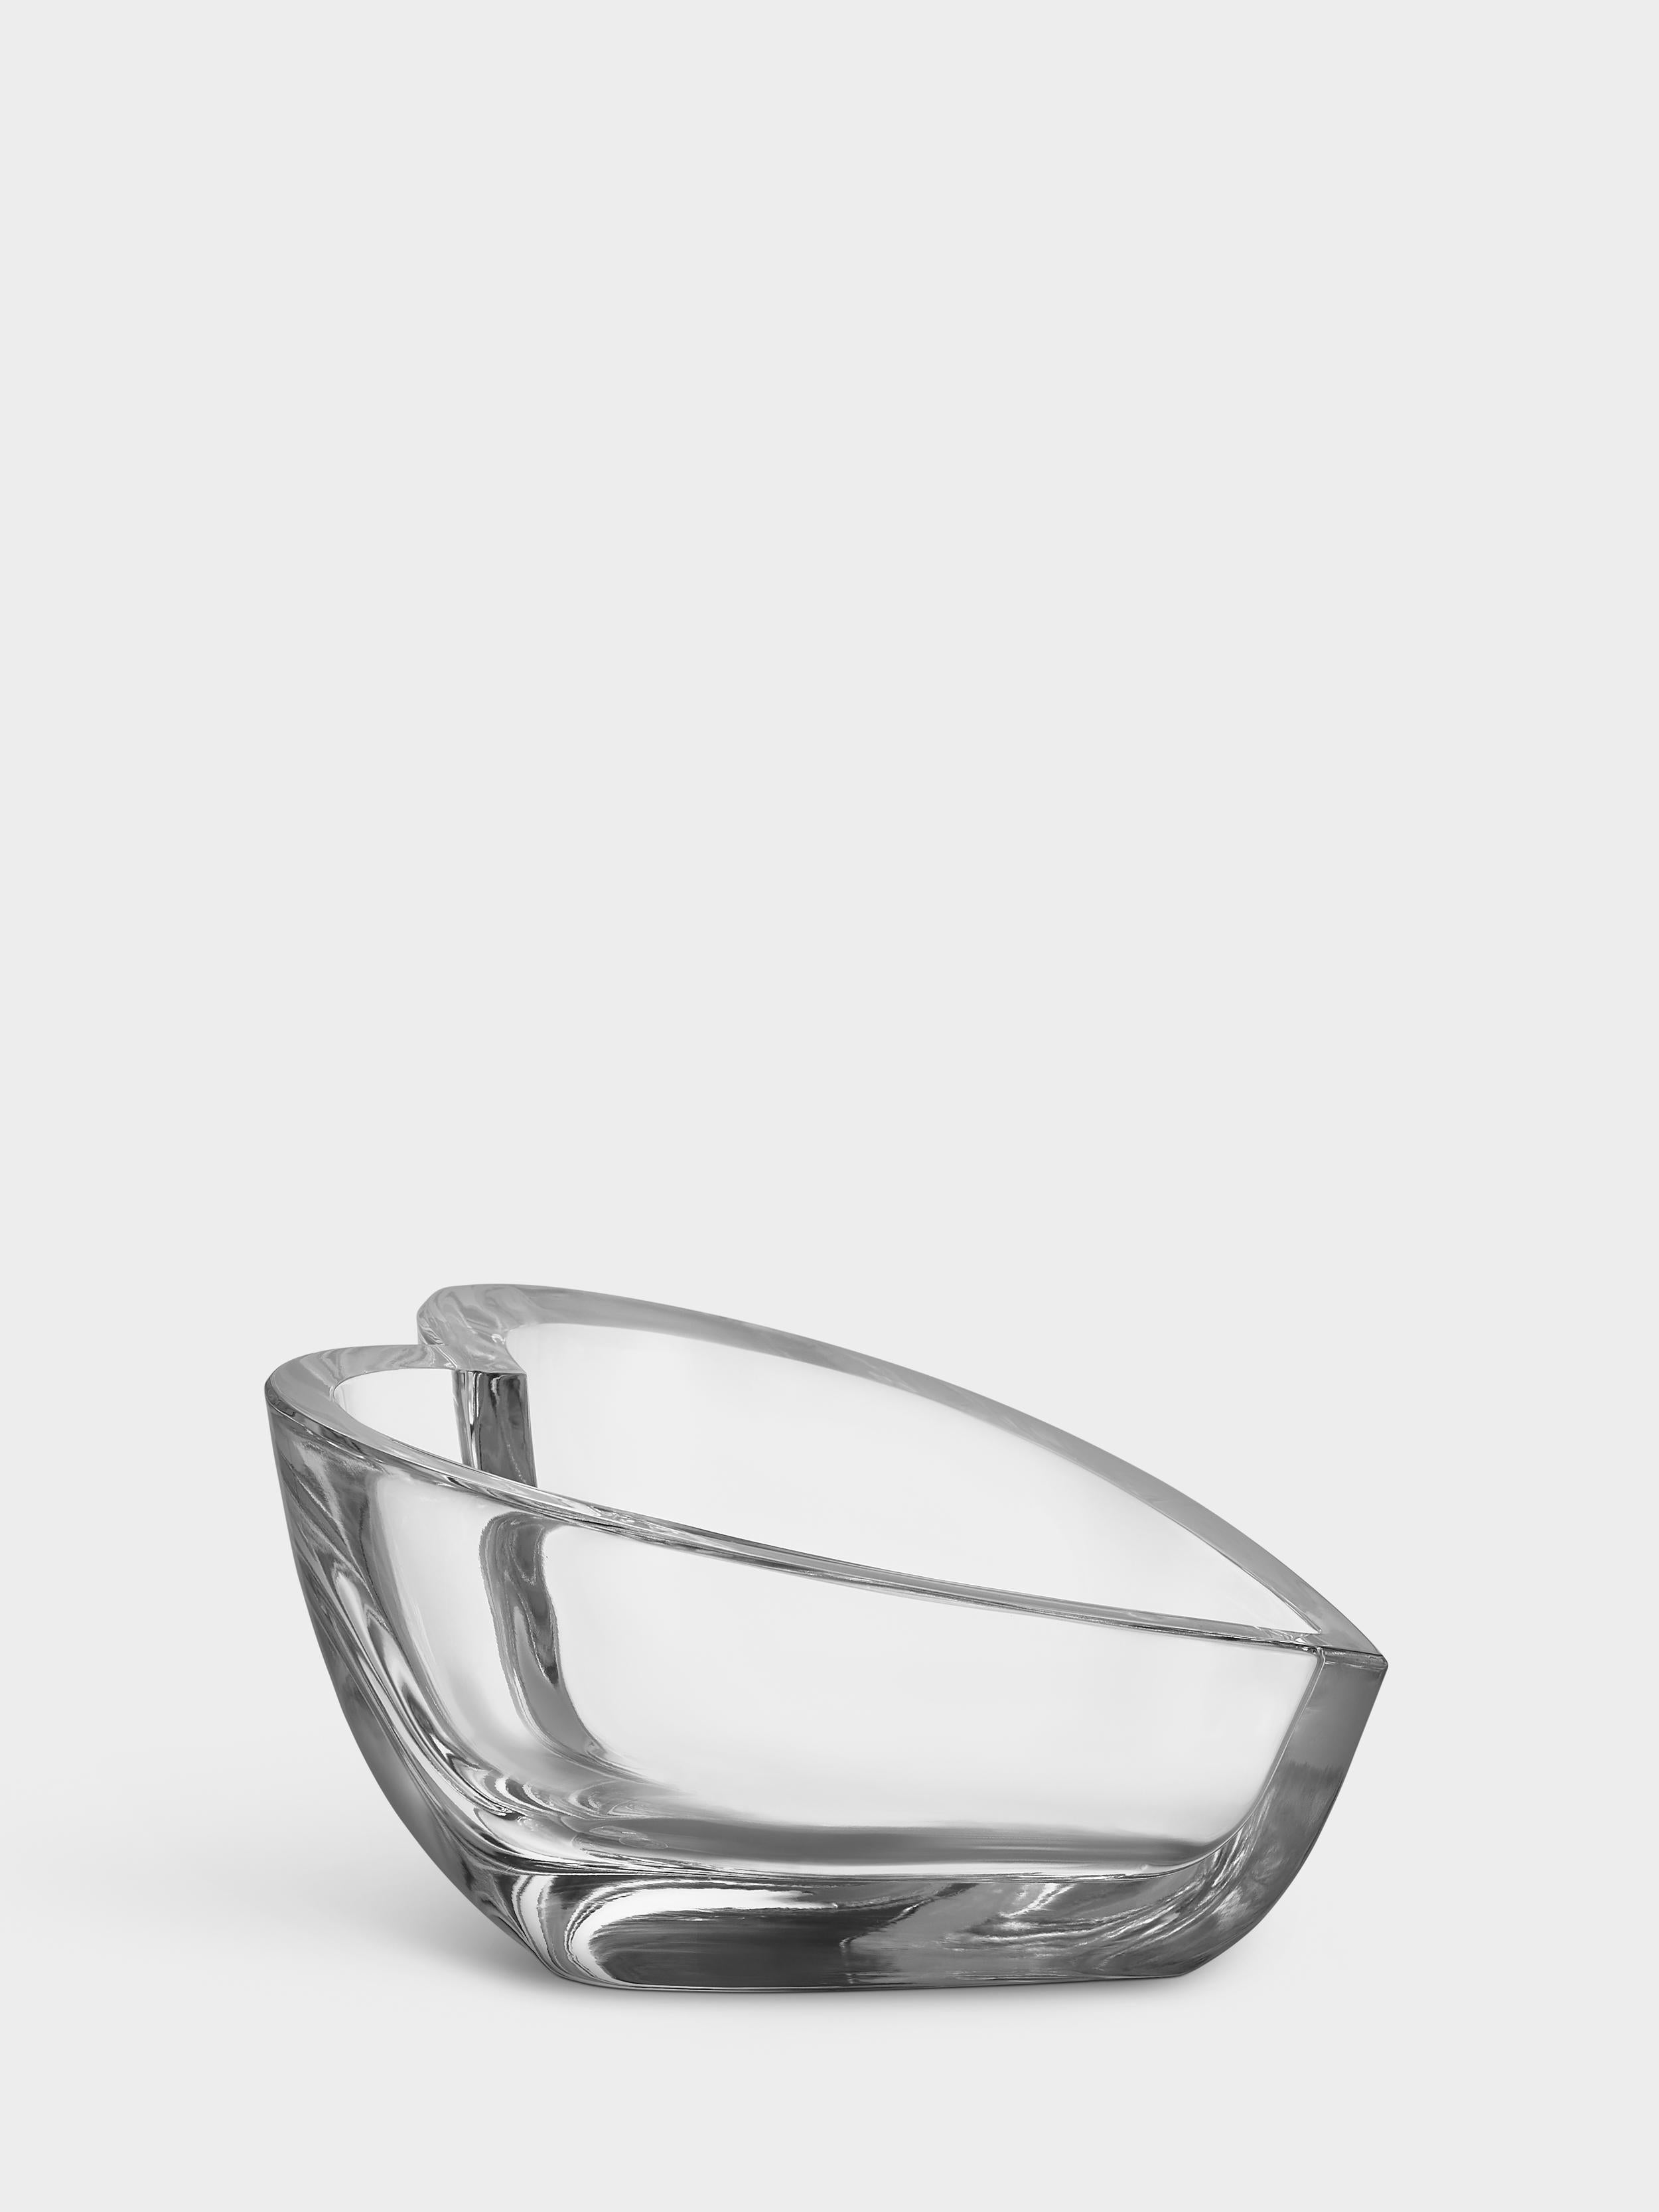 Valentino Bowl from Orrefors is shaped like a heart and made of thick, clear crystal with soft edges giving it a gentle, rounded look. The object is functional as well as decorative on its own. Designed by Martti Rytkönen.
